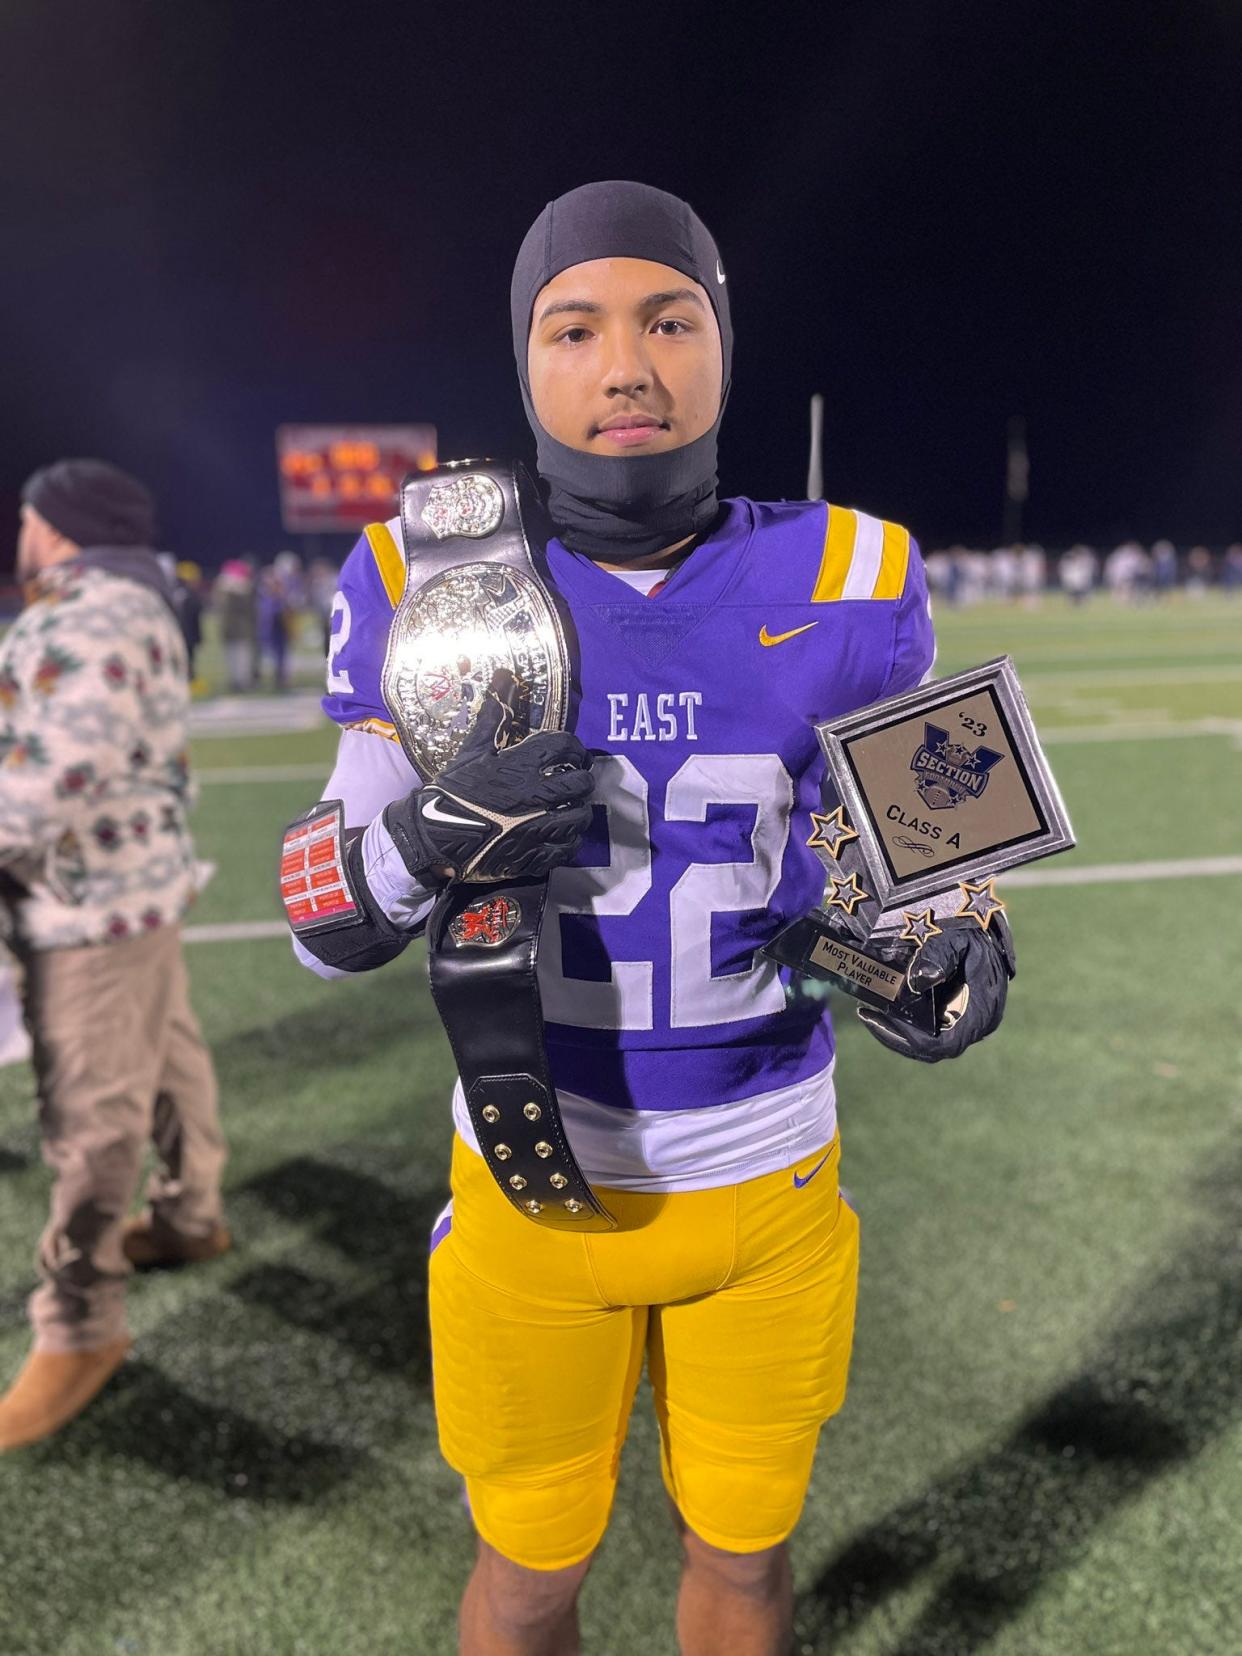 East/WOI senior Anthony Diaz was named MVP of the Section V Class A final after a 25-8 win over Brighton. He returned an interception and threw another touchdown to Ervin Wiggins. The Eagles (11-0) are the first RCSD football team to win a championship since 2017.